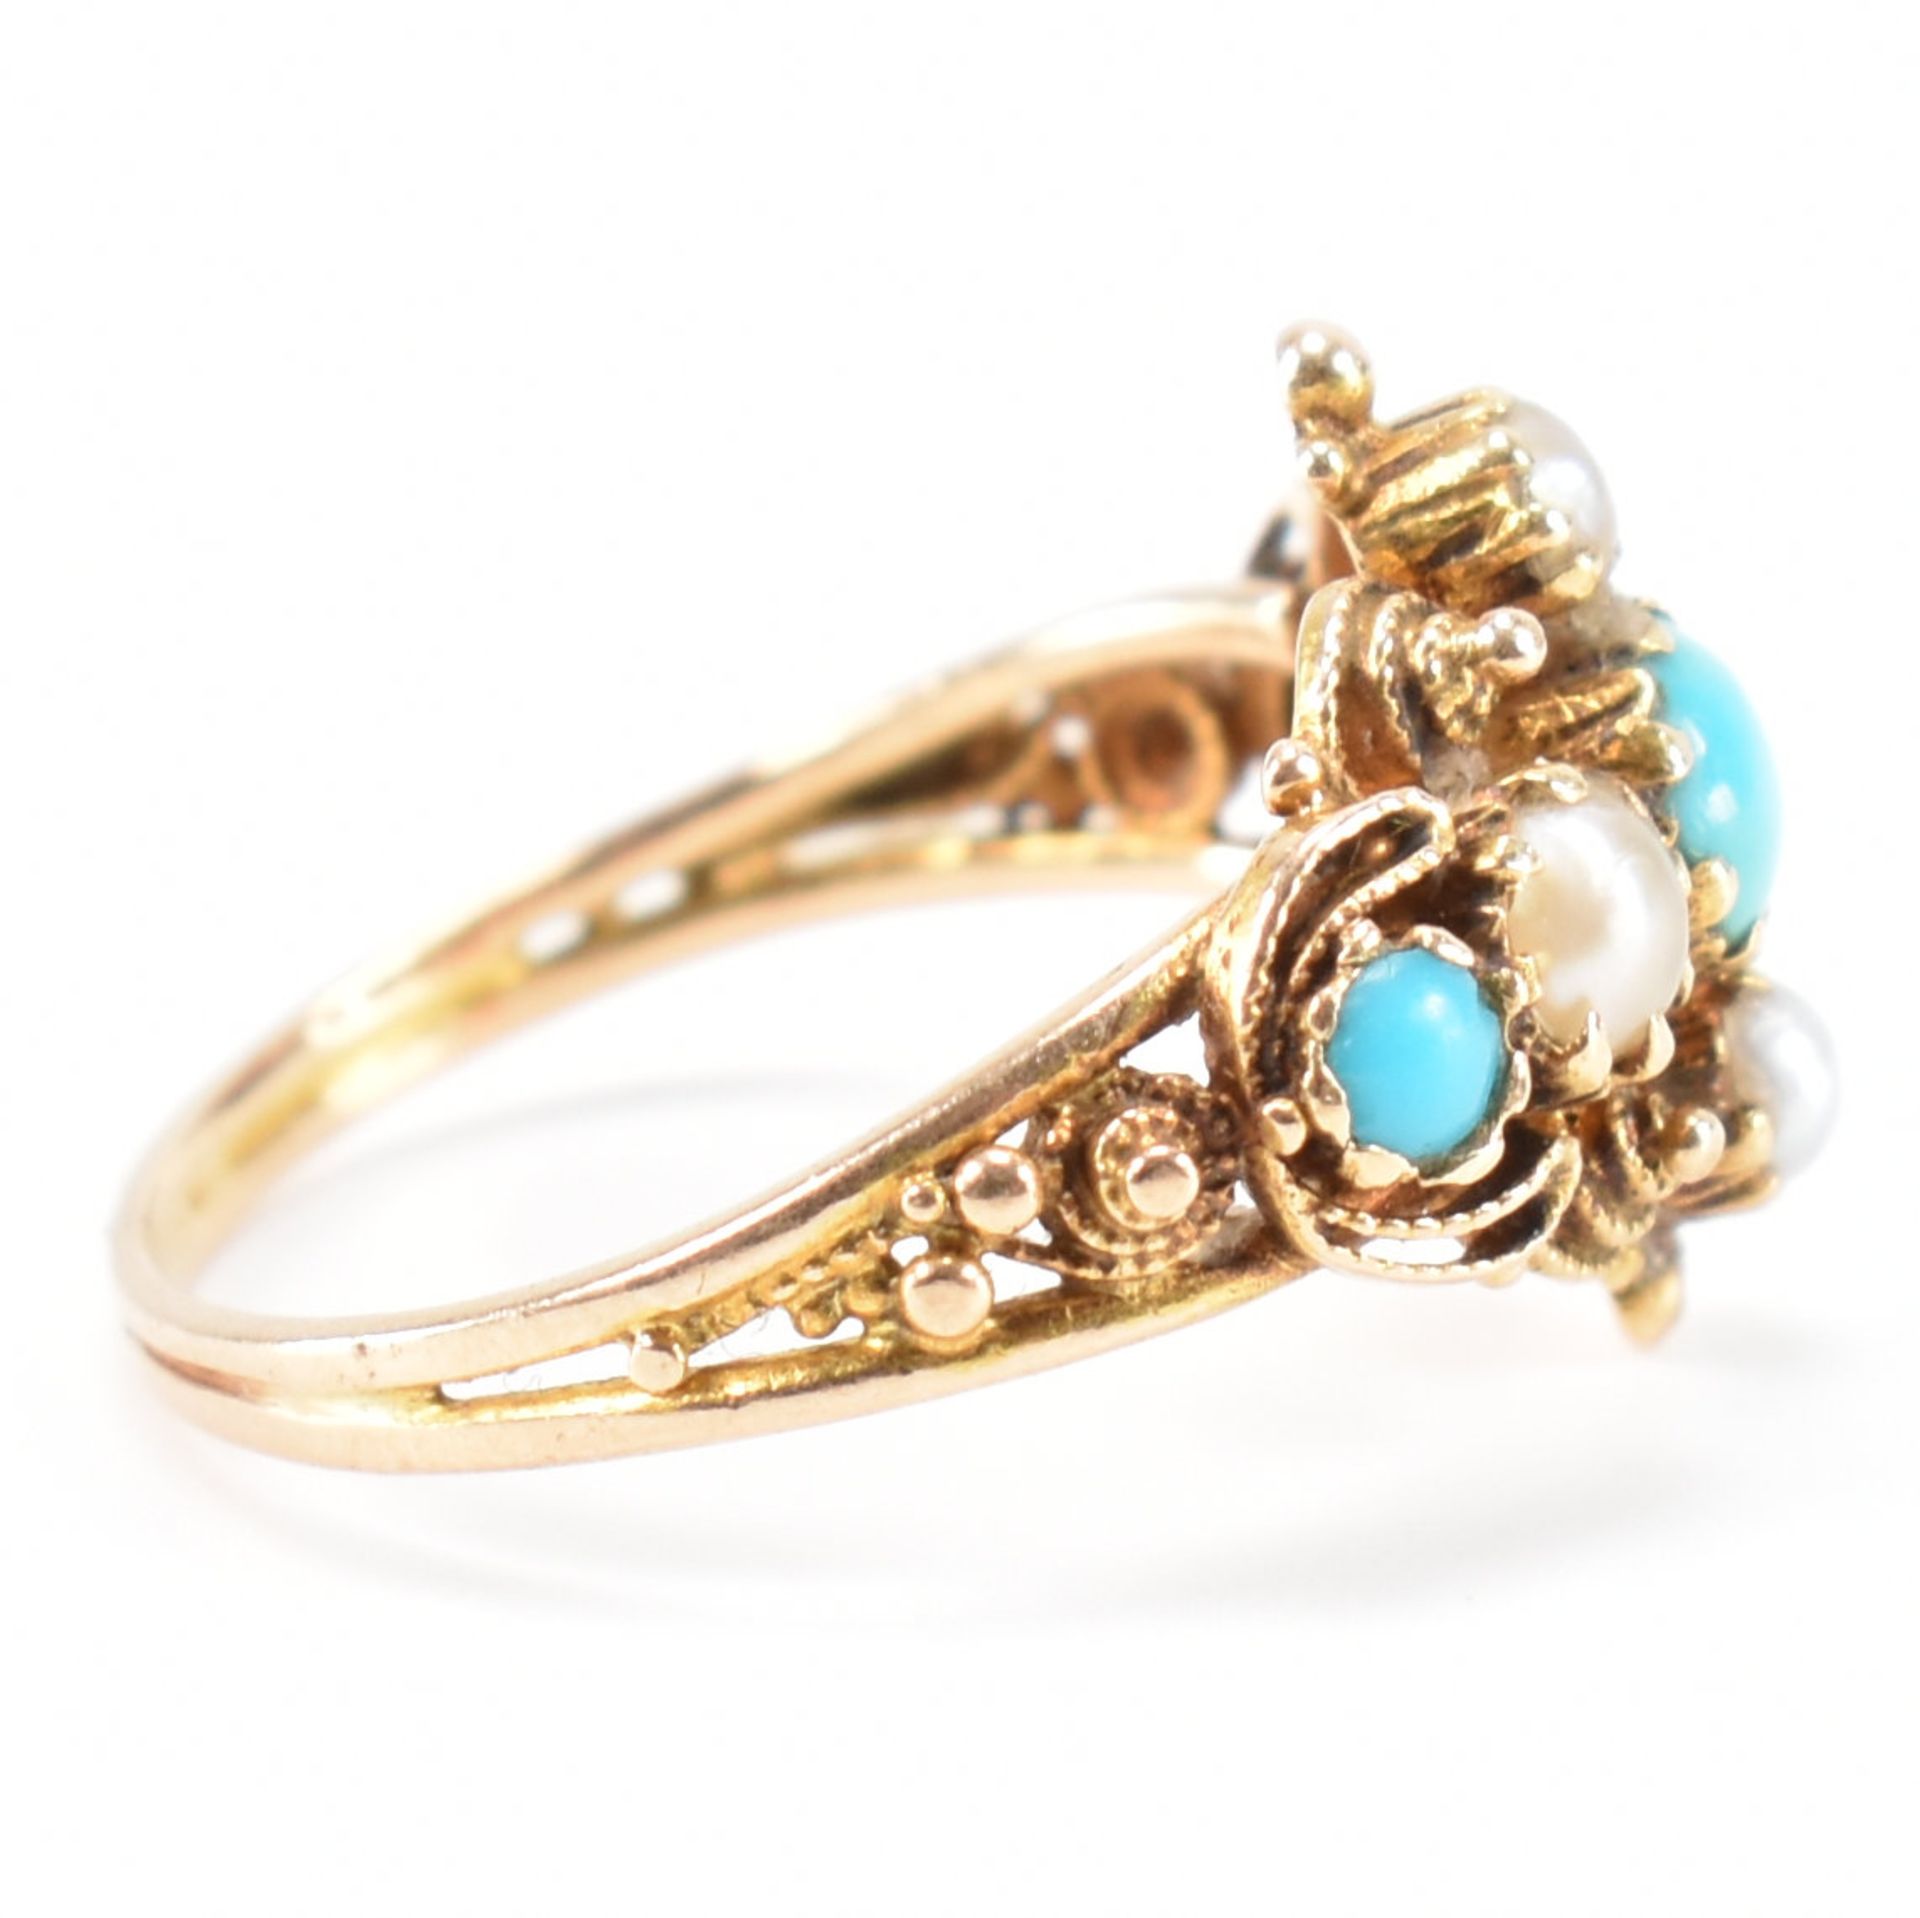 GEORGIAN TURQUOISE & PEARL CANNETILLE RING - Image 5 of 7